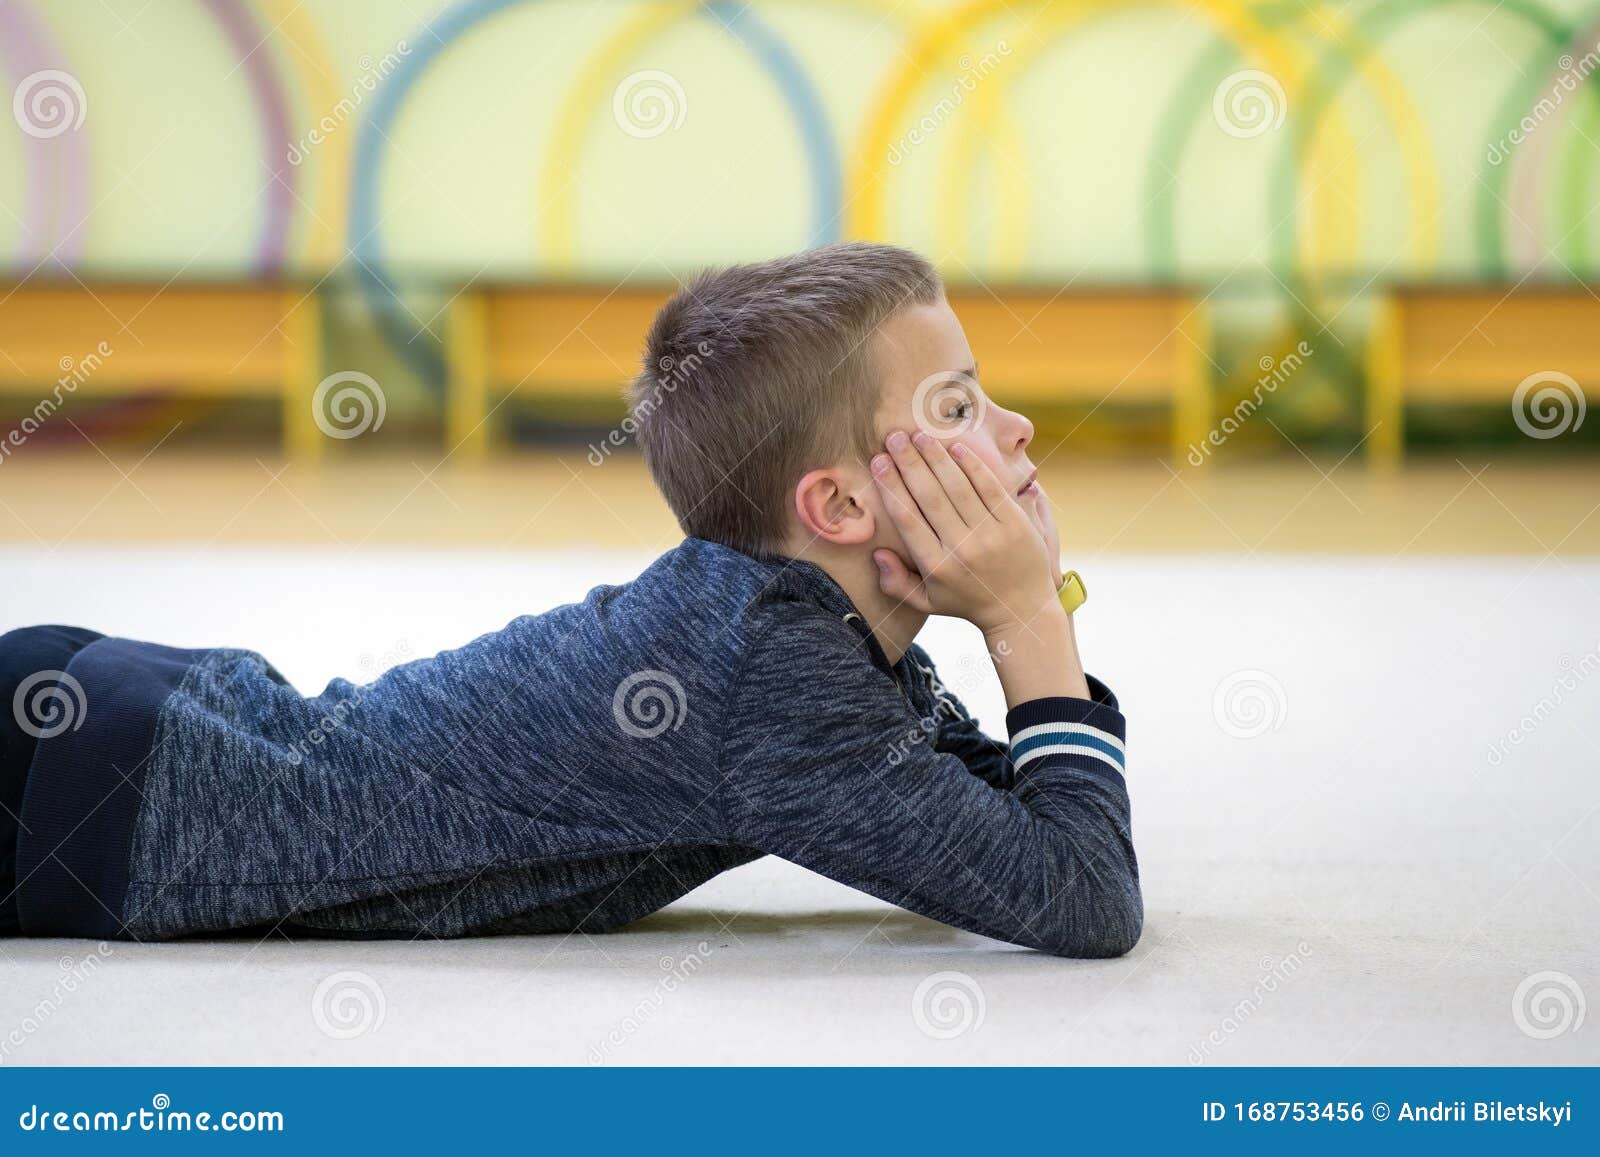 Young Child Boy Laying Down And Relaxiong While Resting On The Floor Inside Sports Room In A